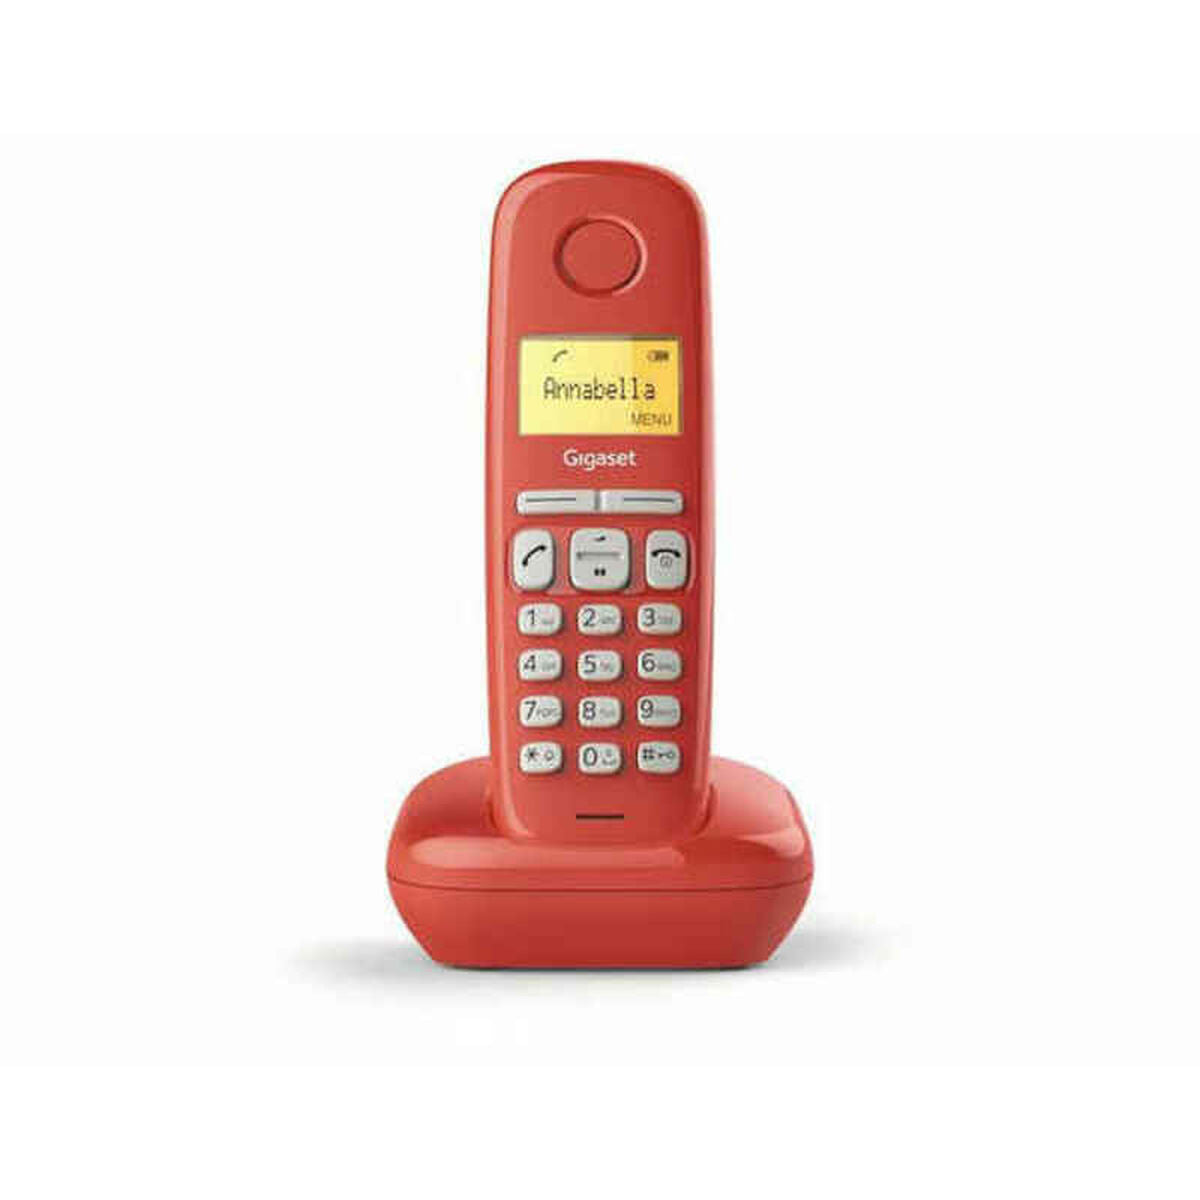 Wireless Phone Gigaset A170 Red 1,5", Gigaset, Electronics, Landline telephones and accessories, wireless-phone-gigaset-a170-red-1-5, Brand_Gigaset, category-reference-2609, category-reference-2617, category-reference-2619, category-reference-t-18372, category-reference-t-19653, Condition_NEW, office, Price_20 - 50, telephones & tablets, Teleworking, RiotNook